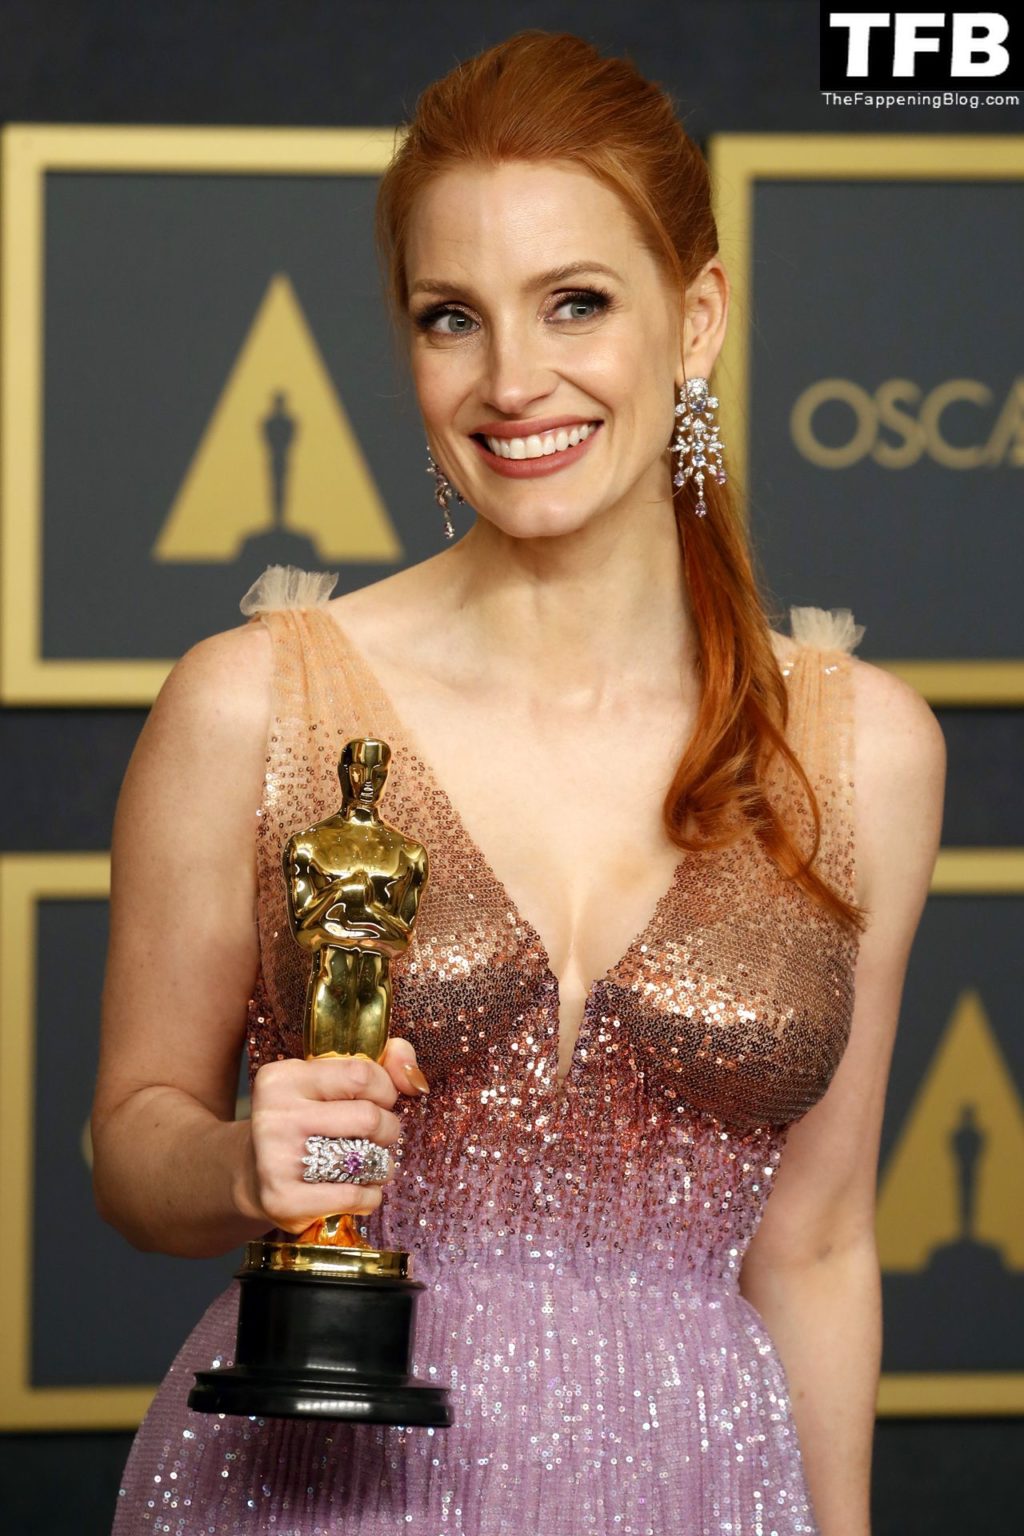 Jessica Chastain Sexy The Fappening Blog 21 1 1024x1536 - Jessica Chastain Poses With Her Oscar at the 94th Academy Awards (150 Photos)